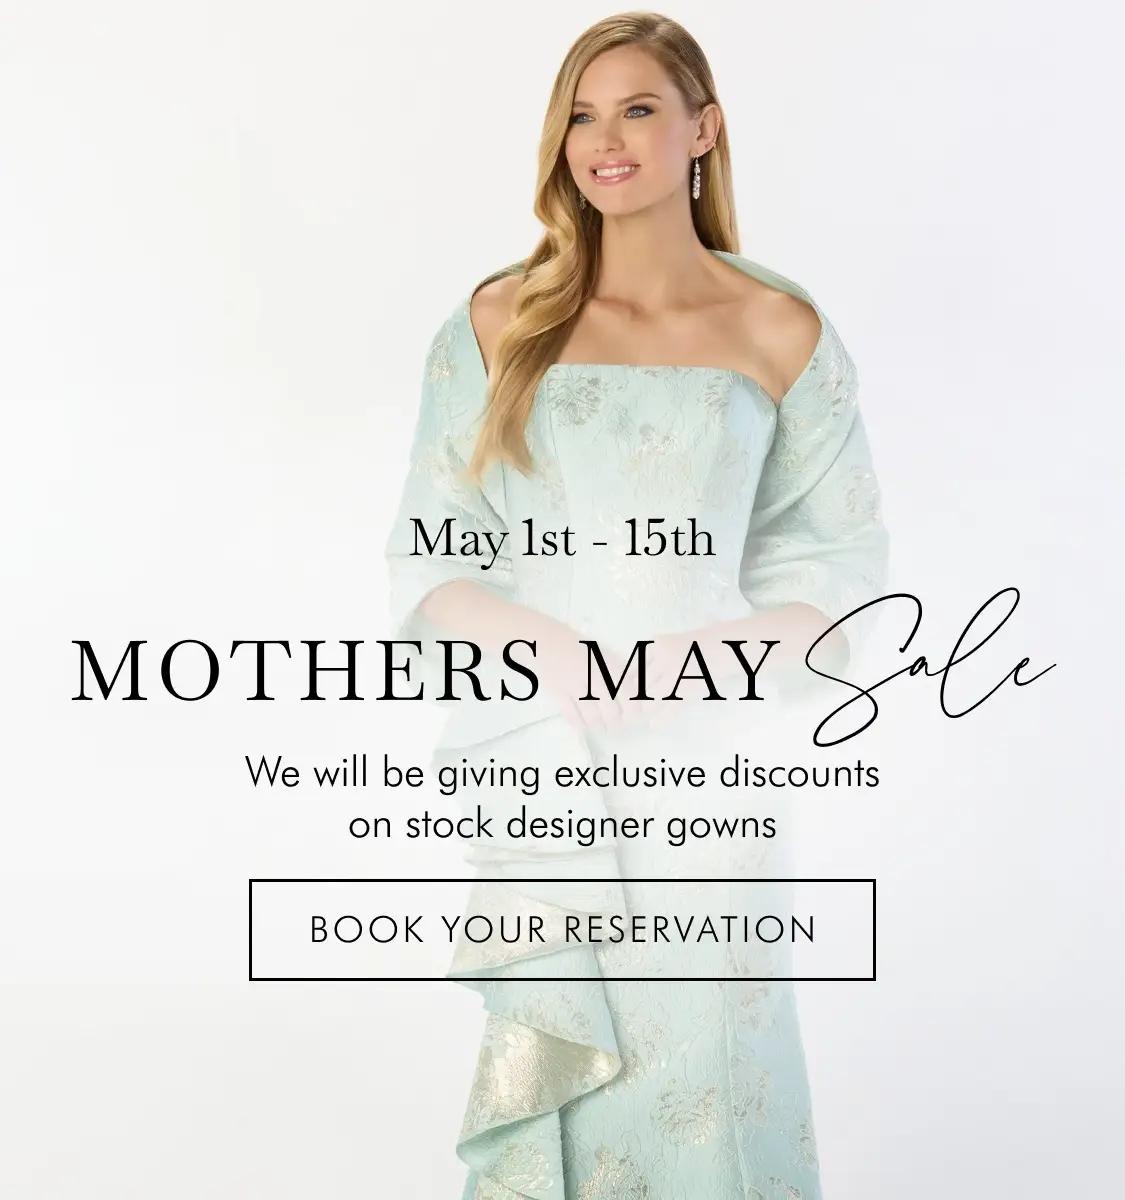 Mothers May Sale mobile banner